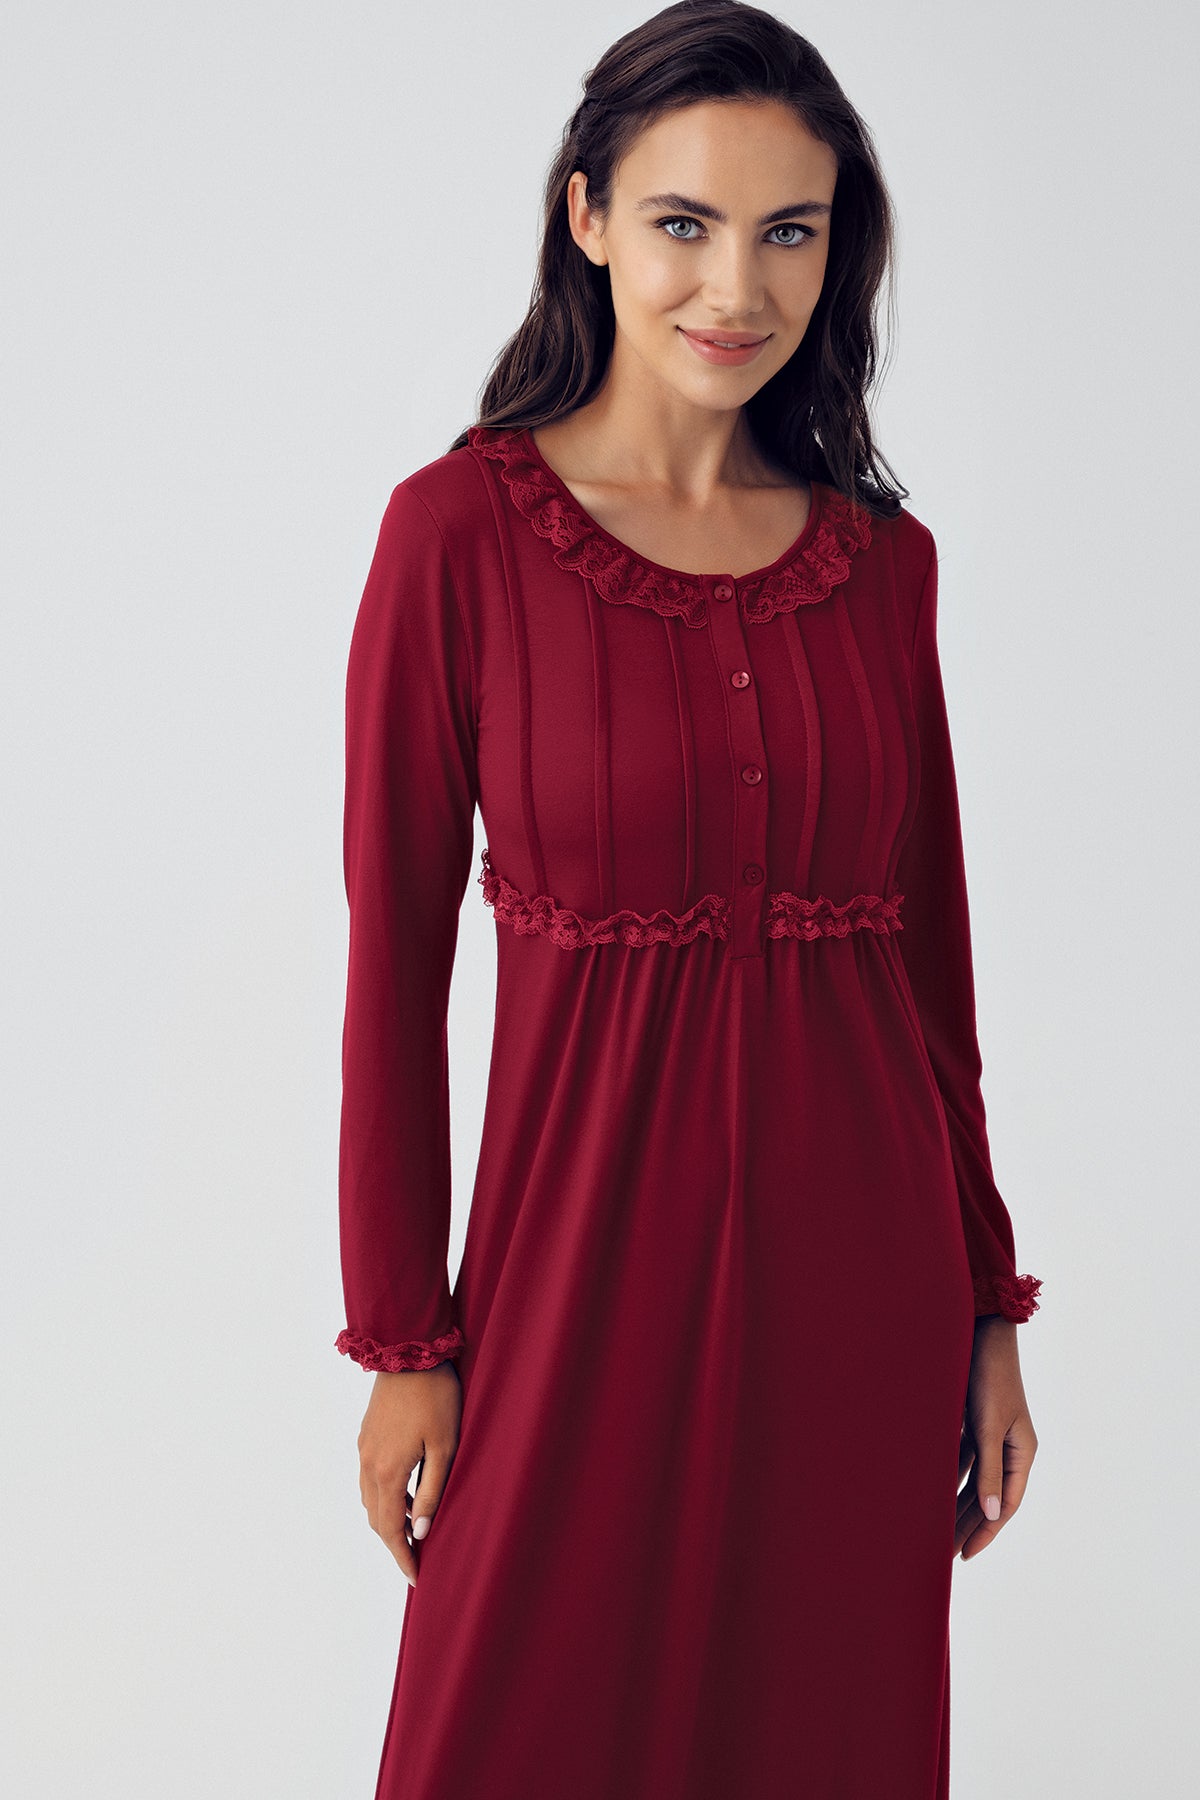 Shopymommy 15121 Guipure Collar Plus Size Maternity & Nursing Nightgown Claret Red